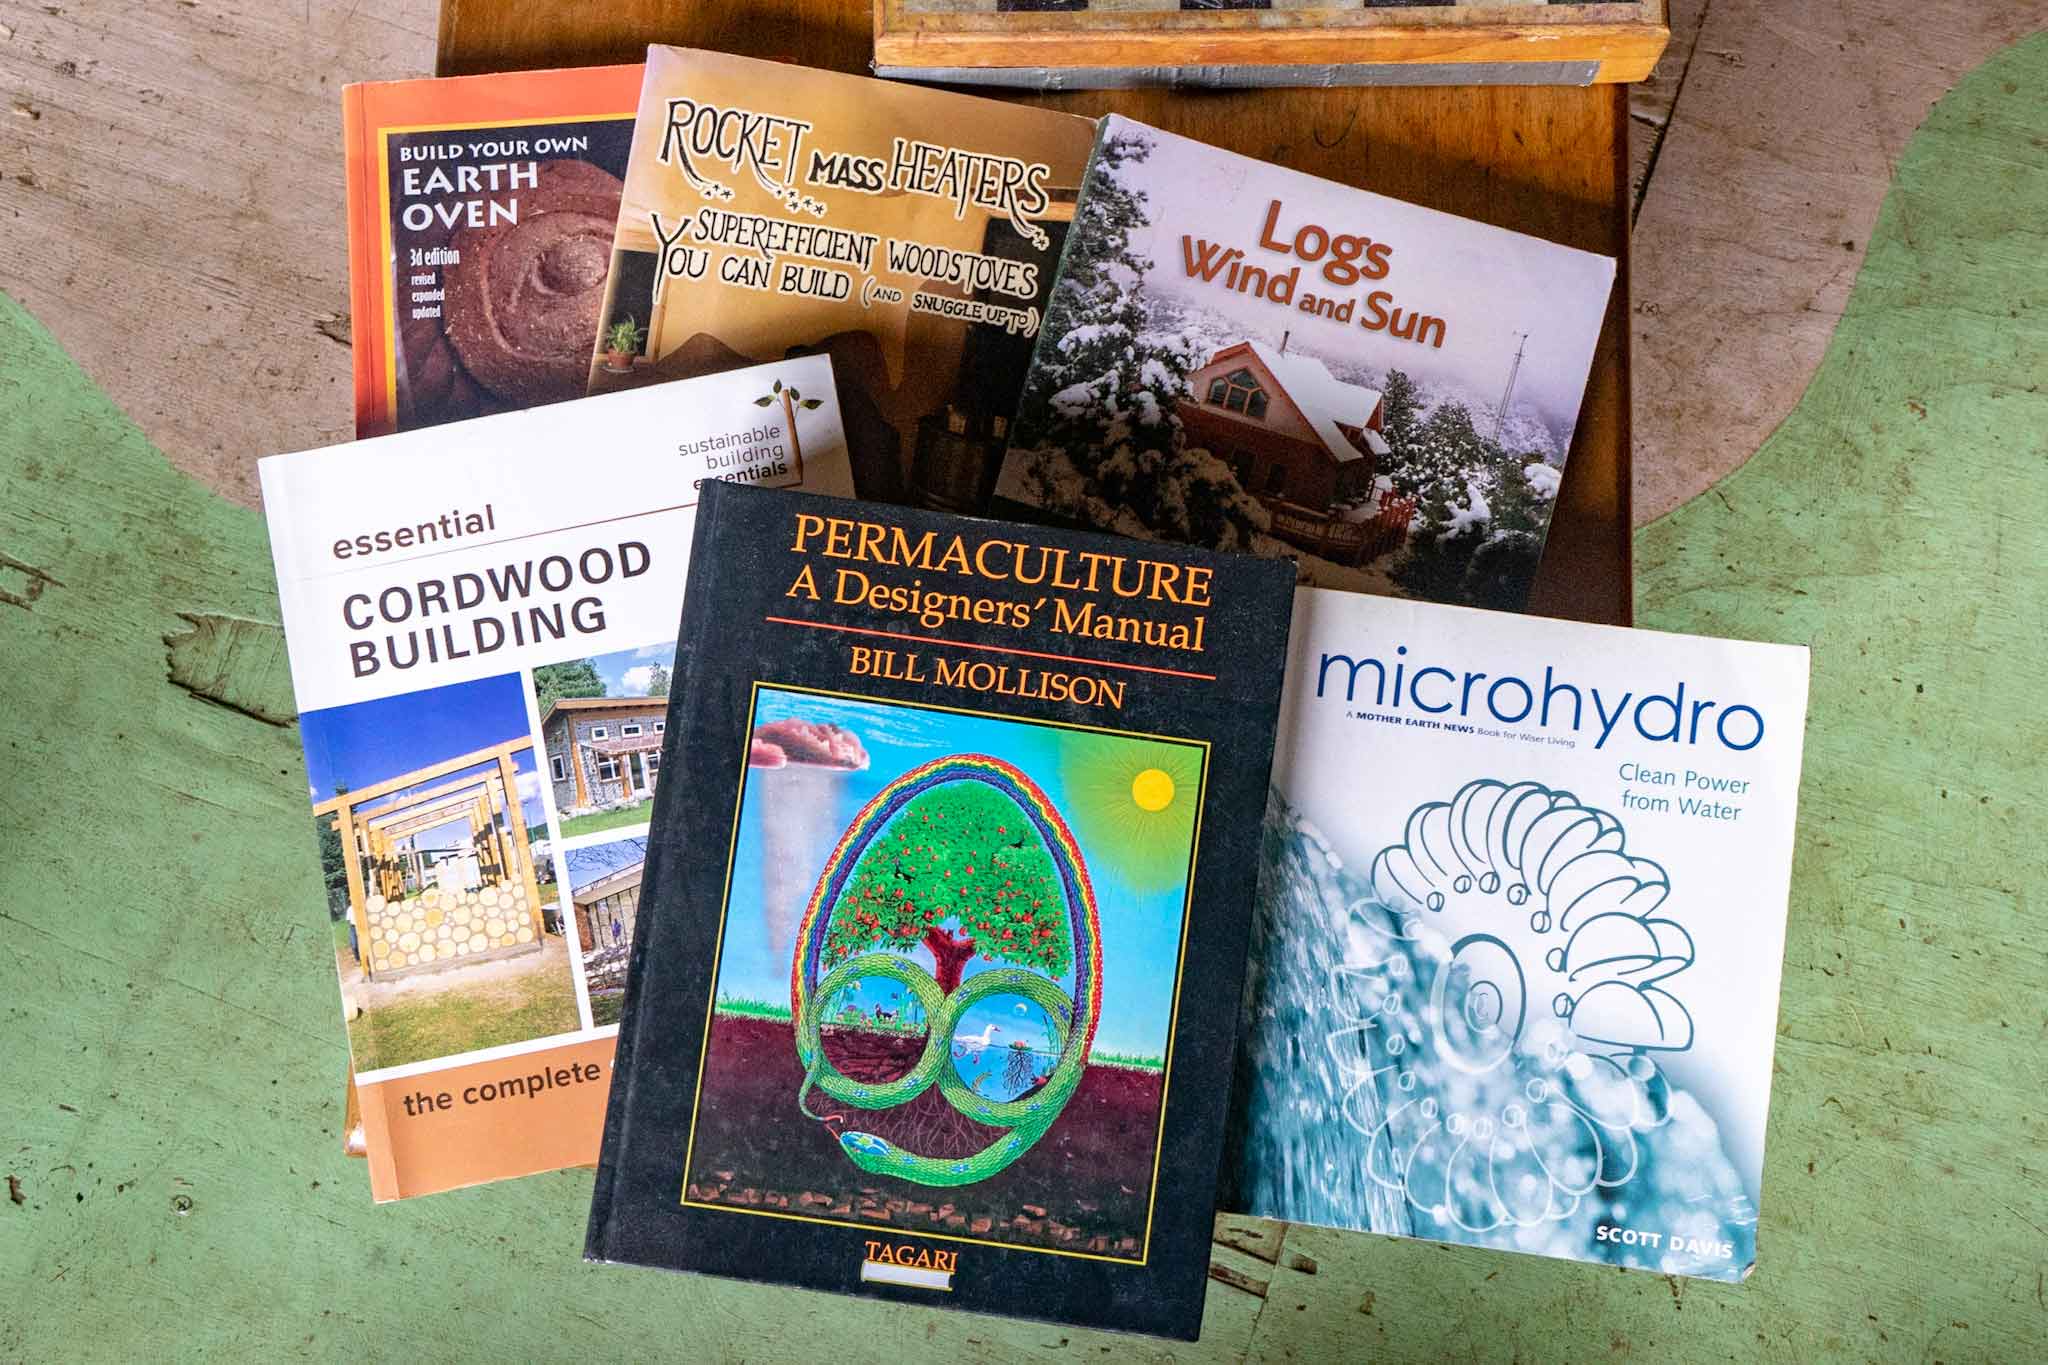 books on permaculture, hydro-power, cordwood building, and heated furniture